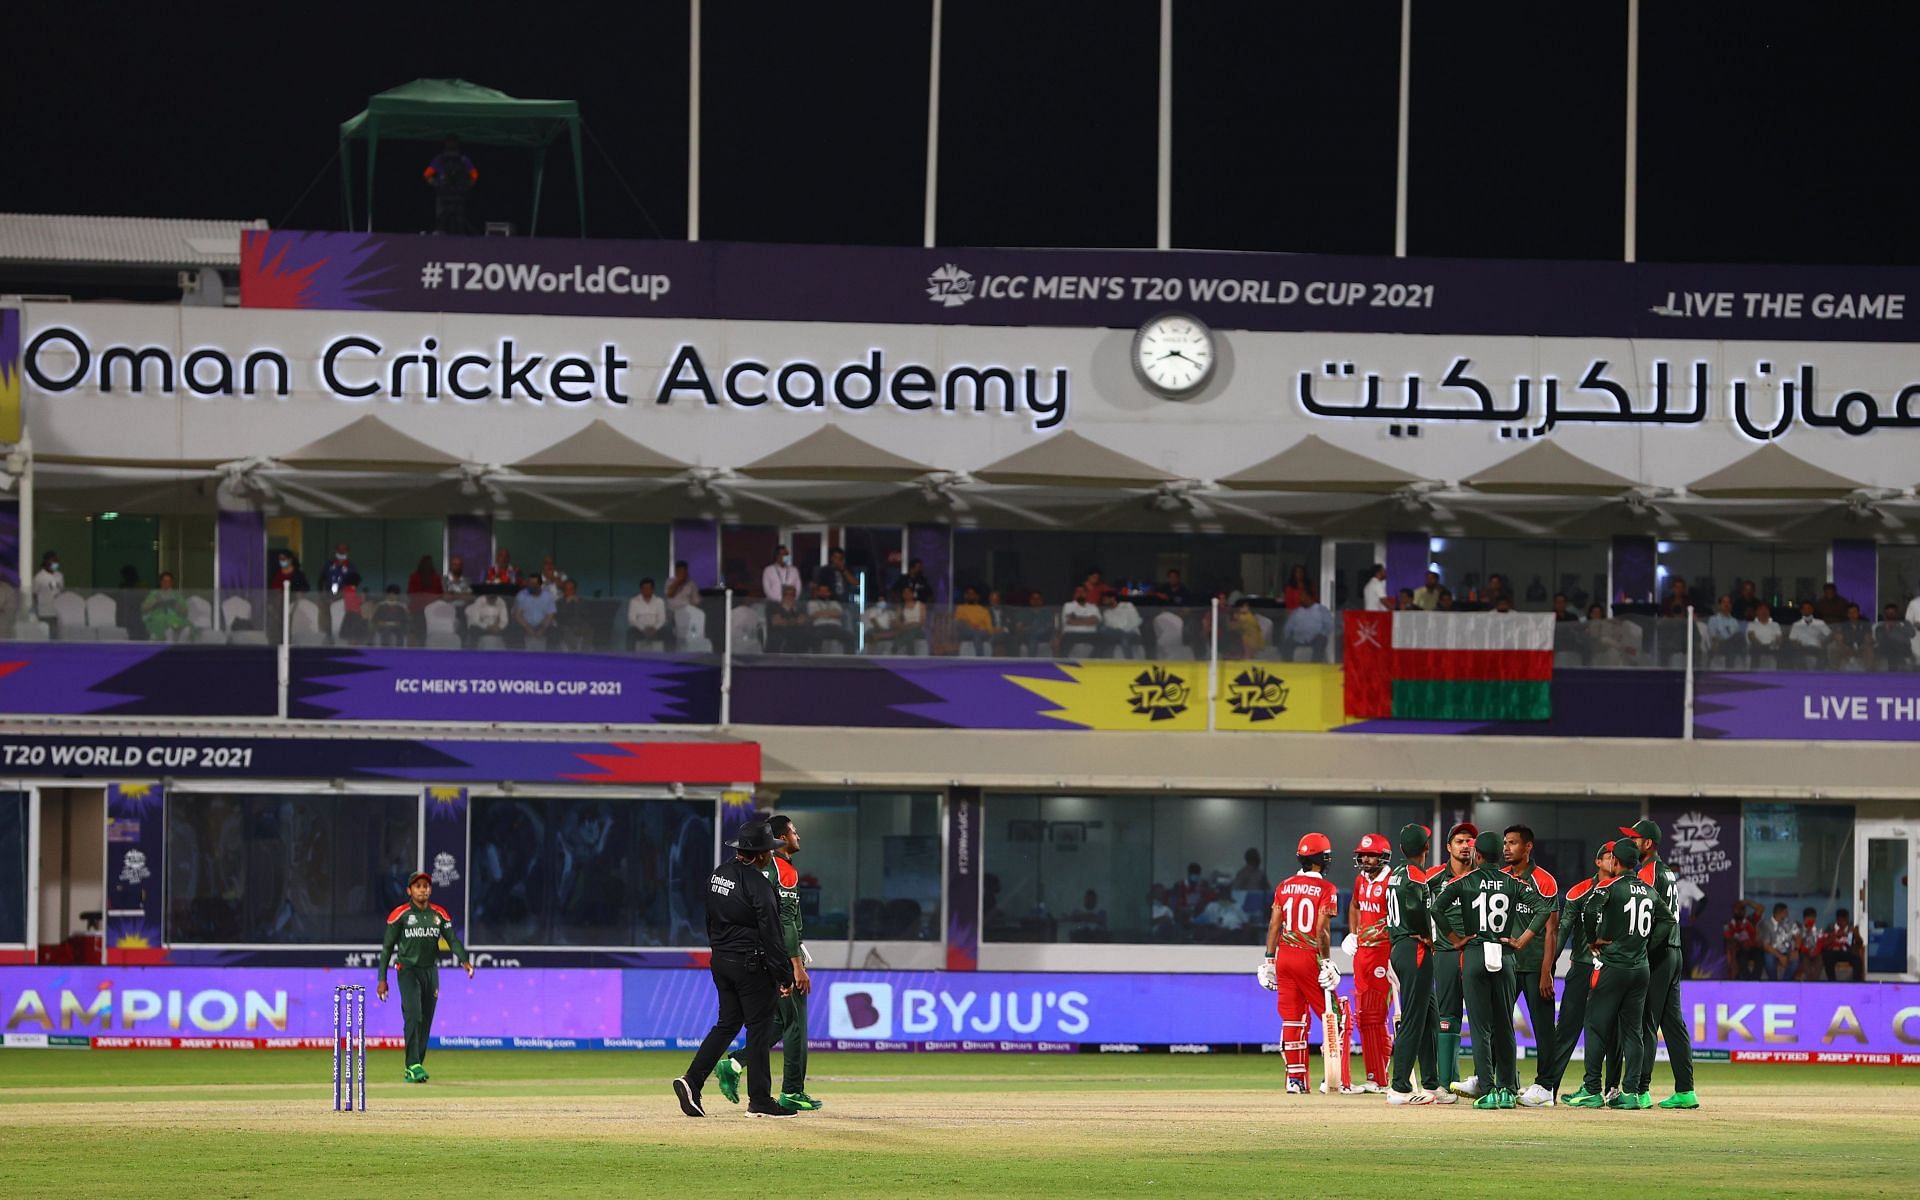 Bangladesh got off the mark after triumphing Oman by 26 runs on Tuesday [Credits: T20 World Cup]